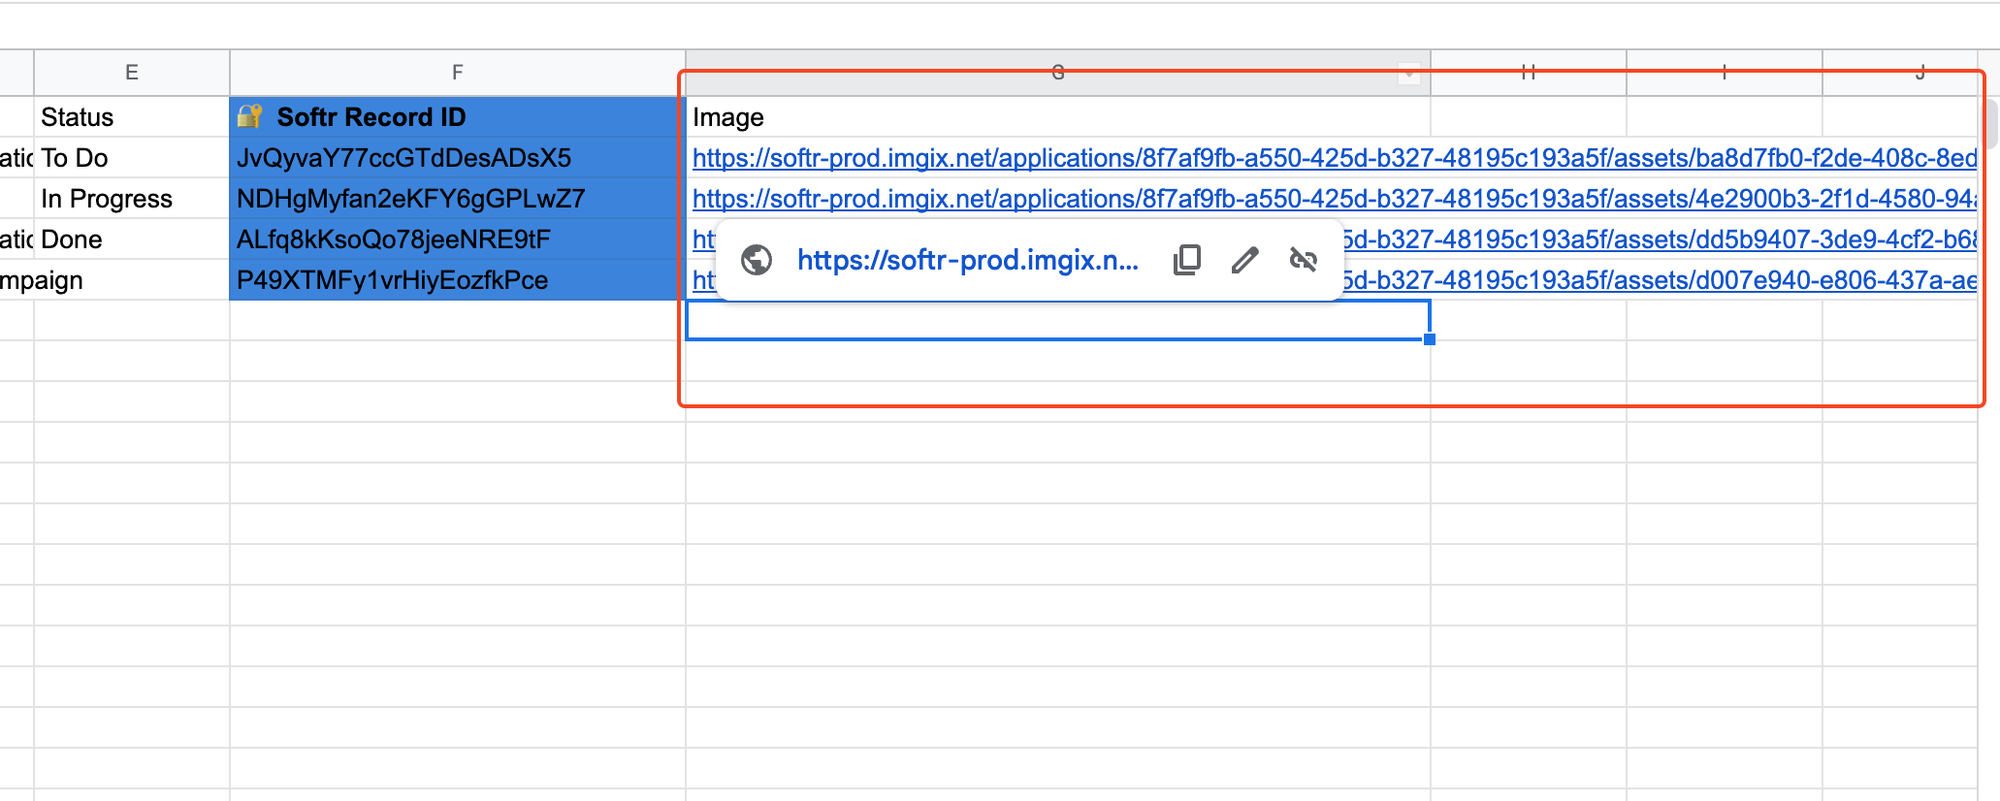 The Image field on Google Sheets